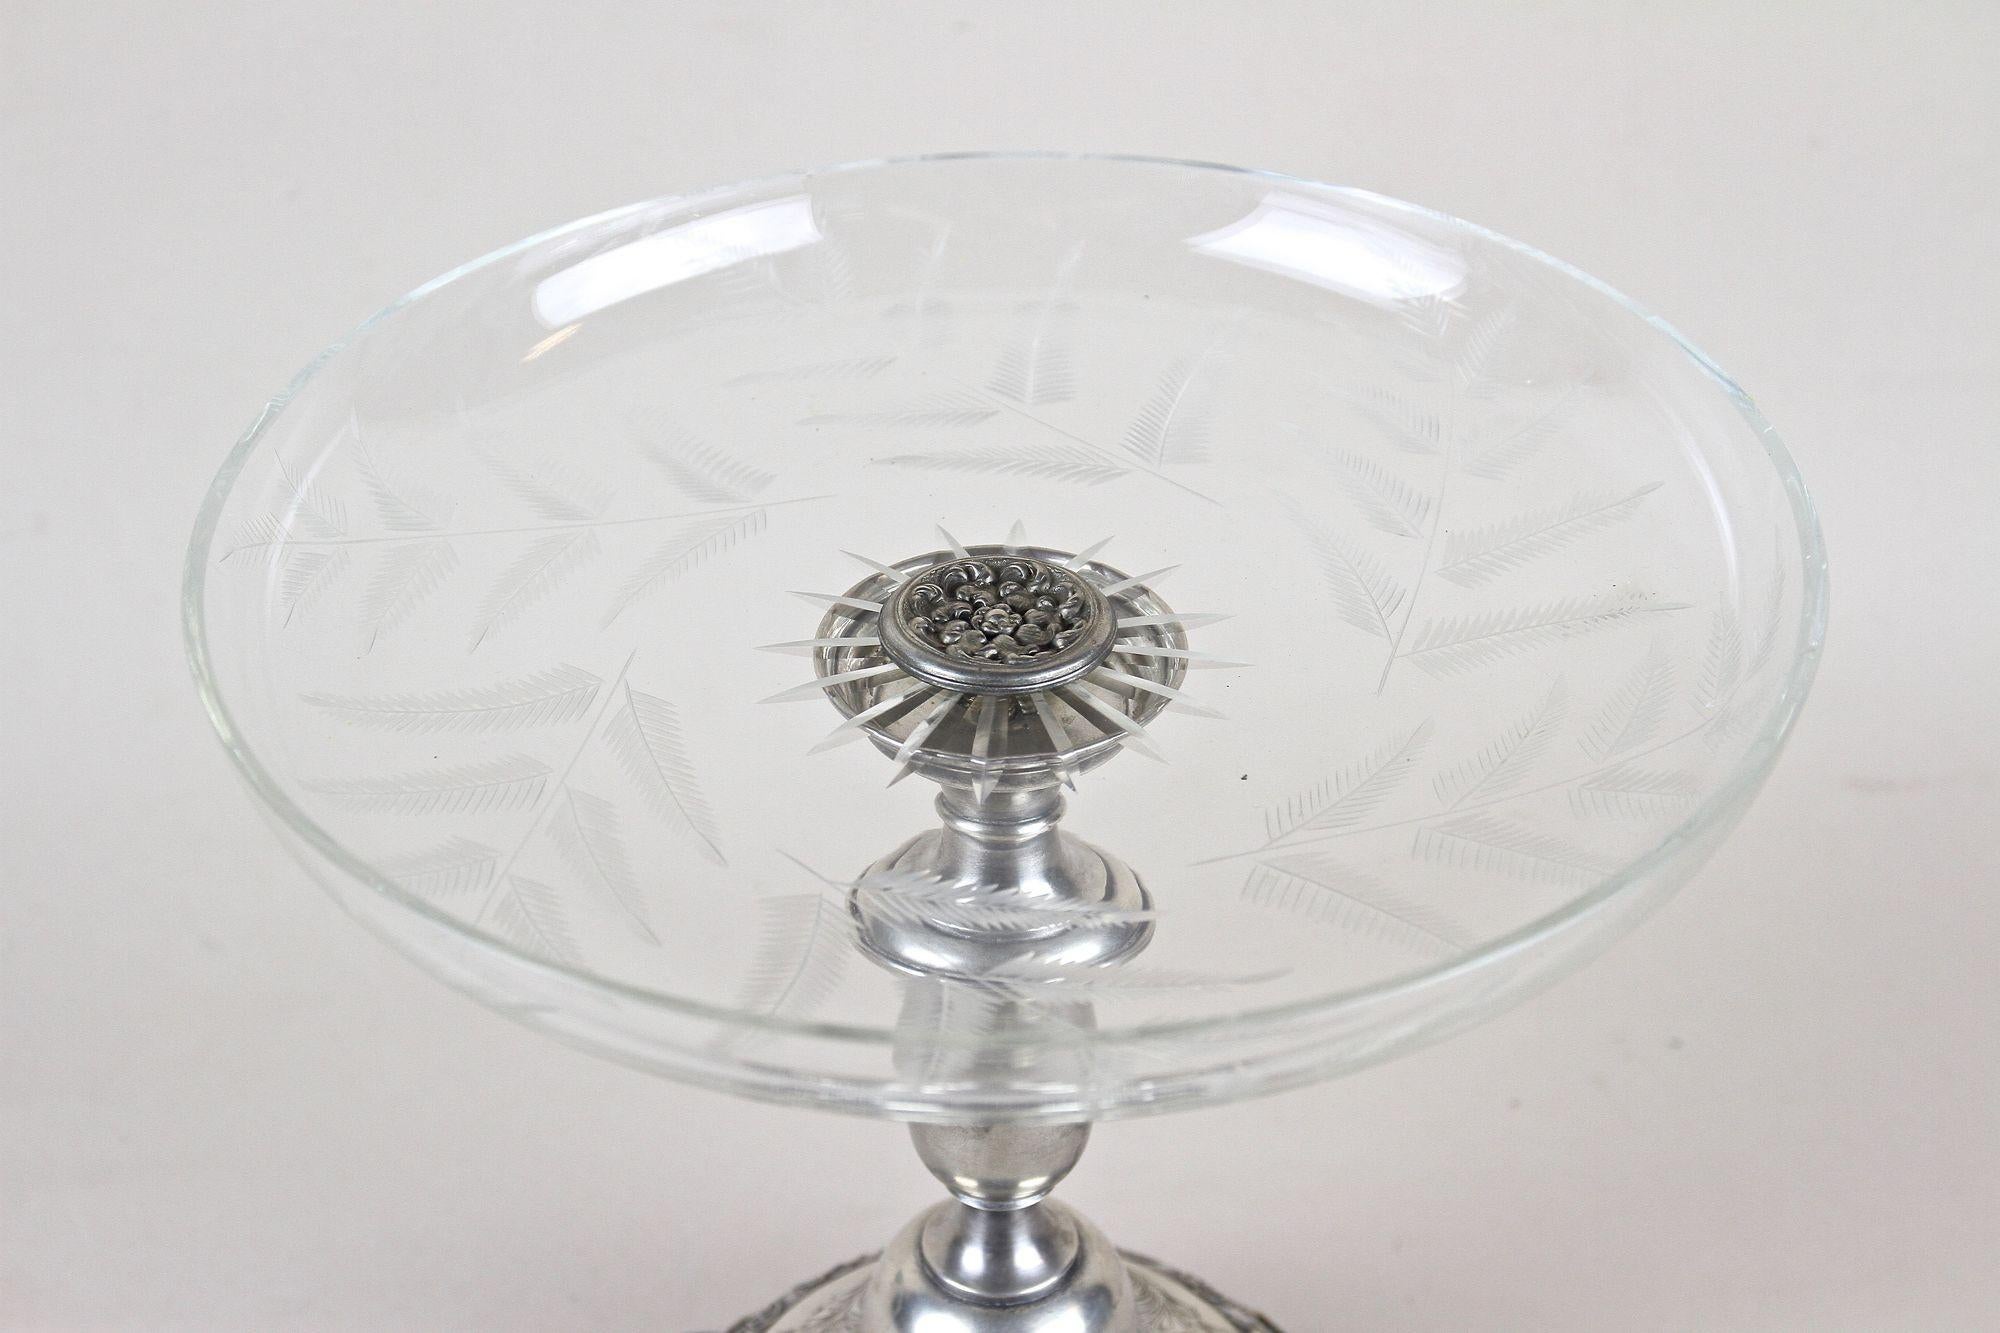 Fantastic Art Nouveau silver centerpiece with glass bowl from the period in Austria around 1895. The artfully shaped base, elaborately made of 276,3 gramm solid silver, shows an outstanding design with impressive floral/ organic elements. The wide